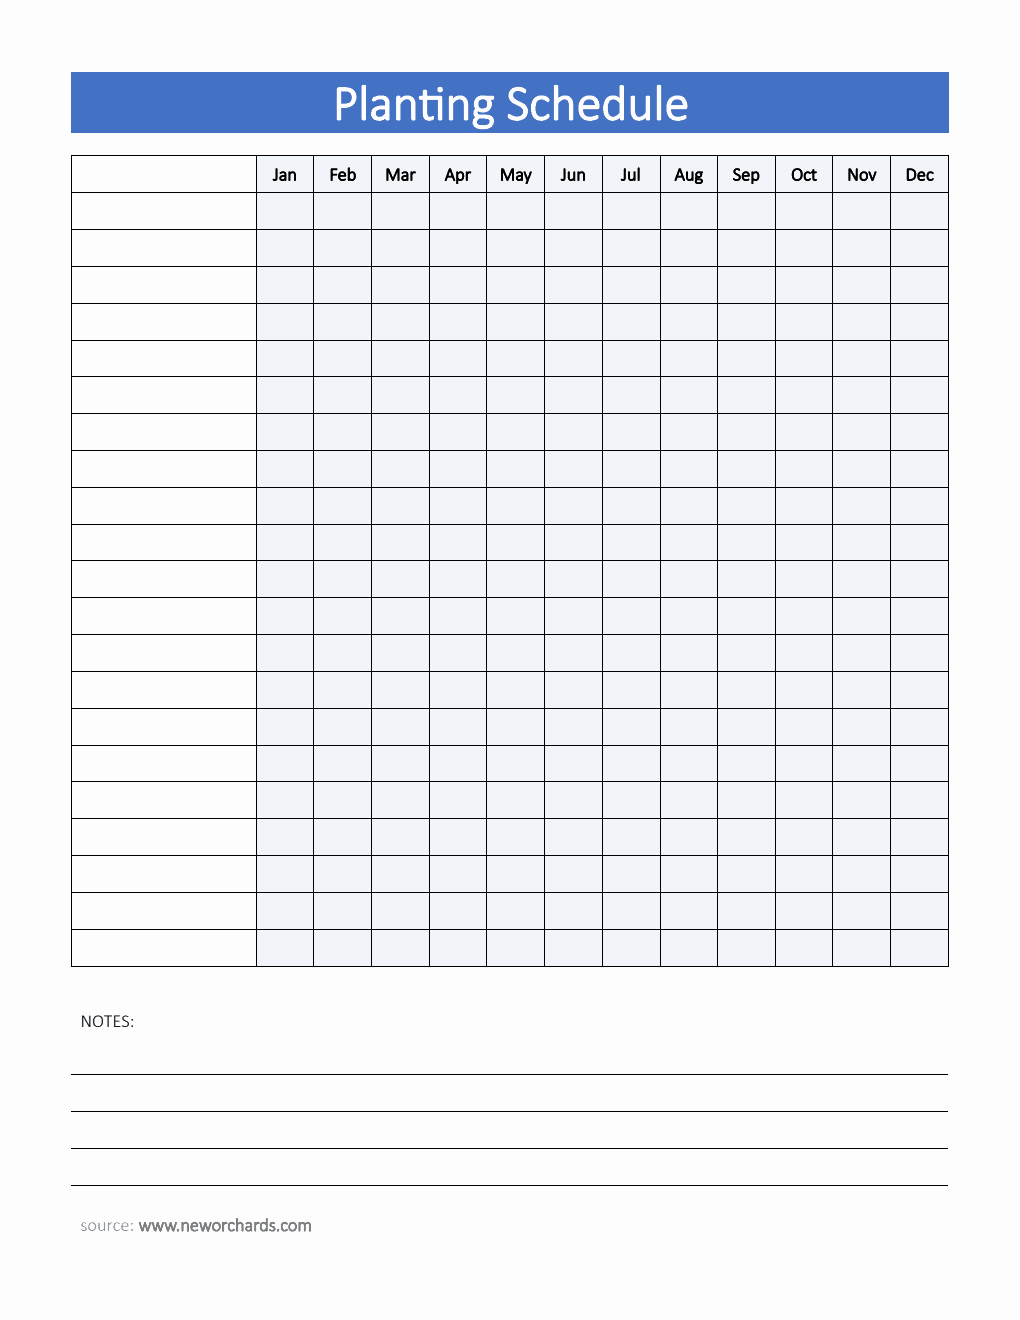  Planting Schedule Template - PDF